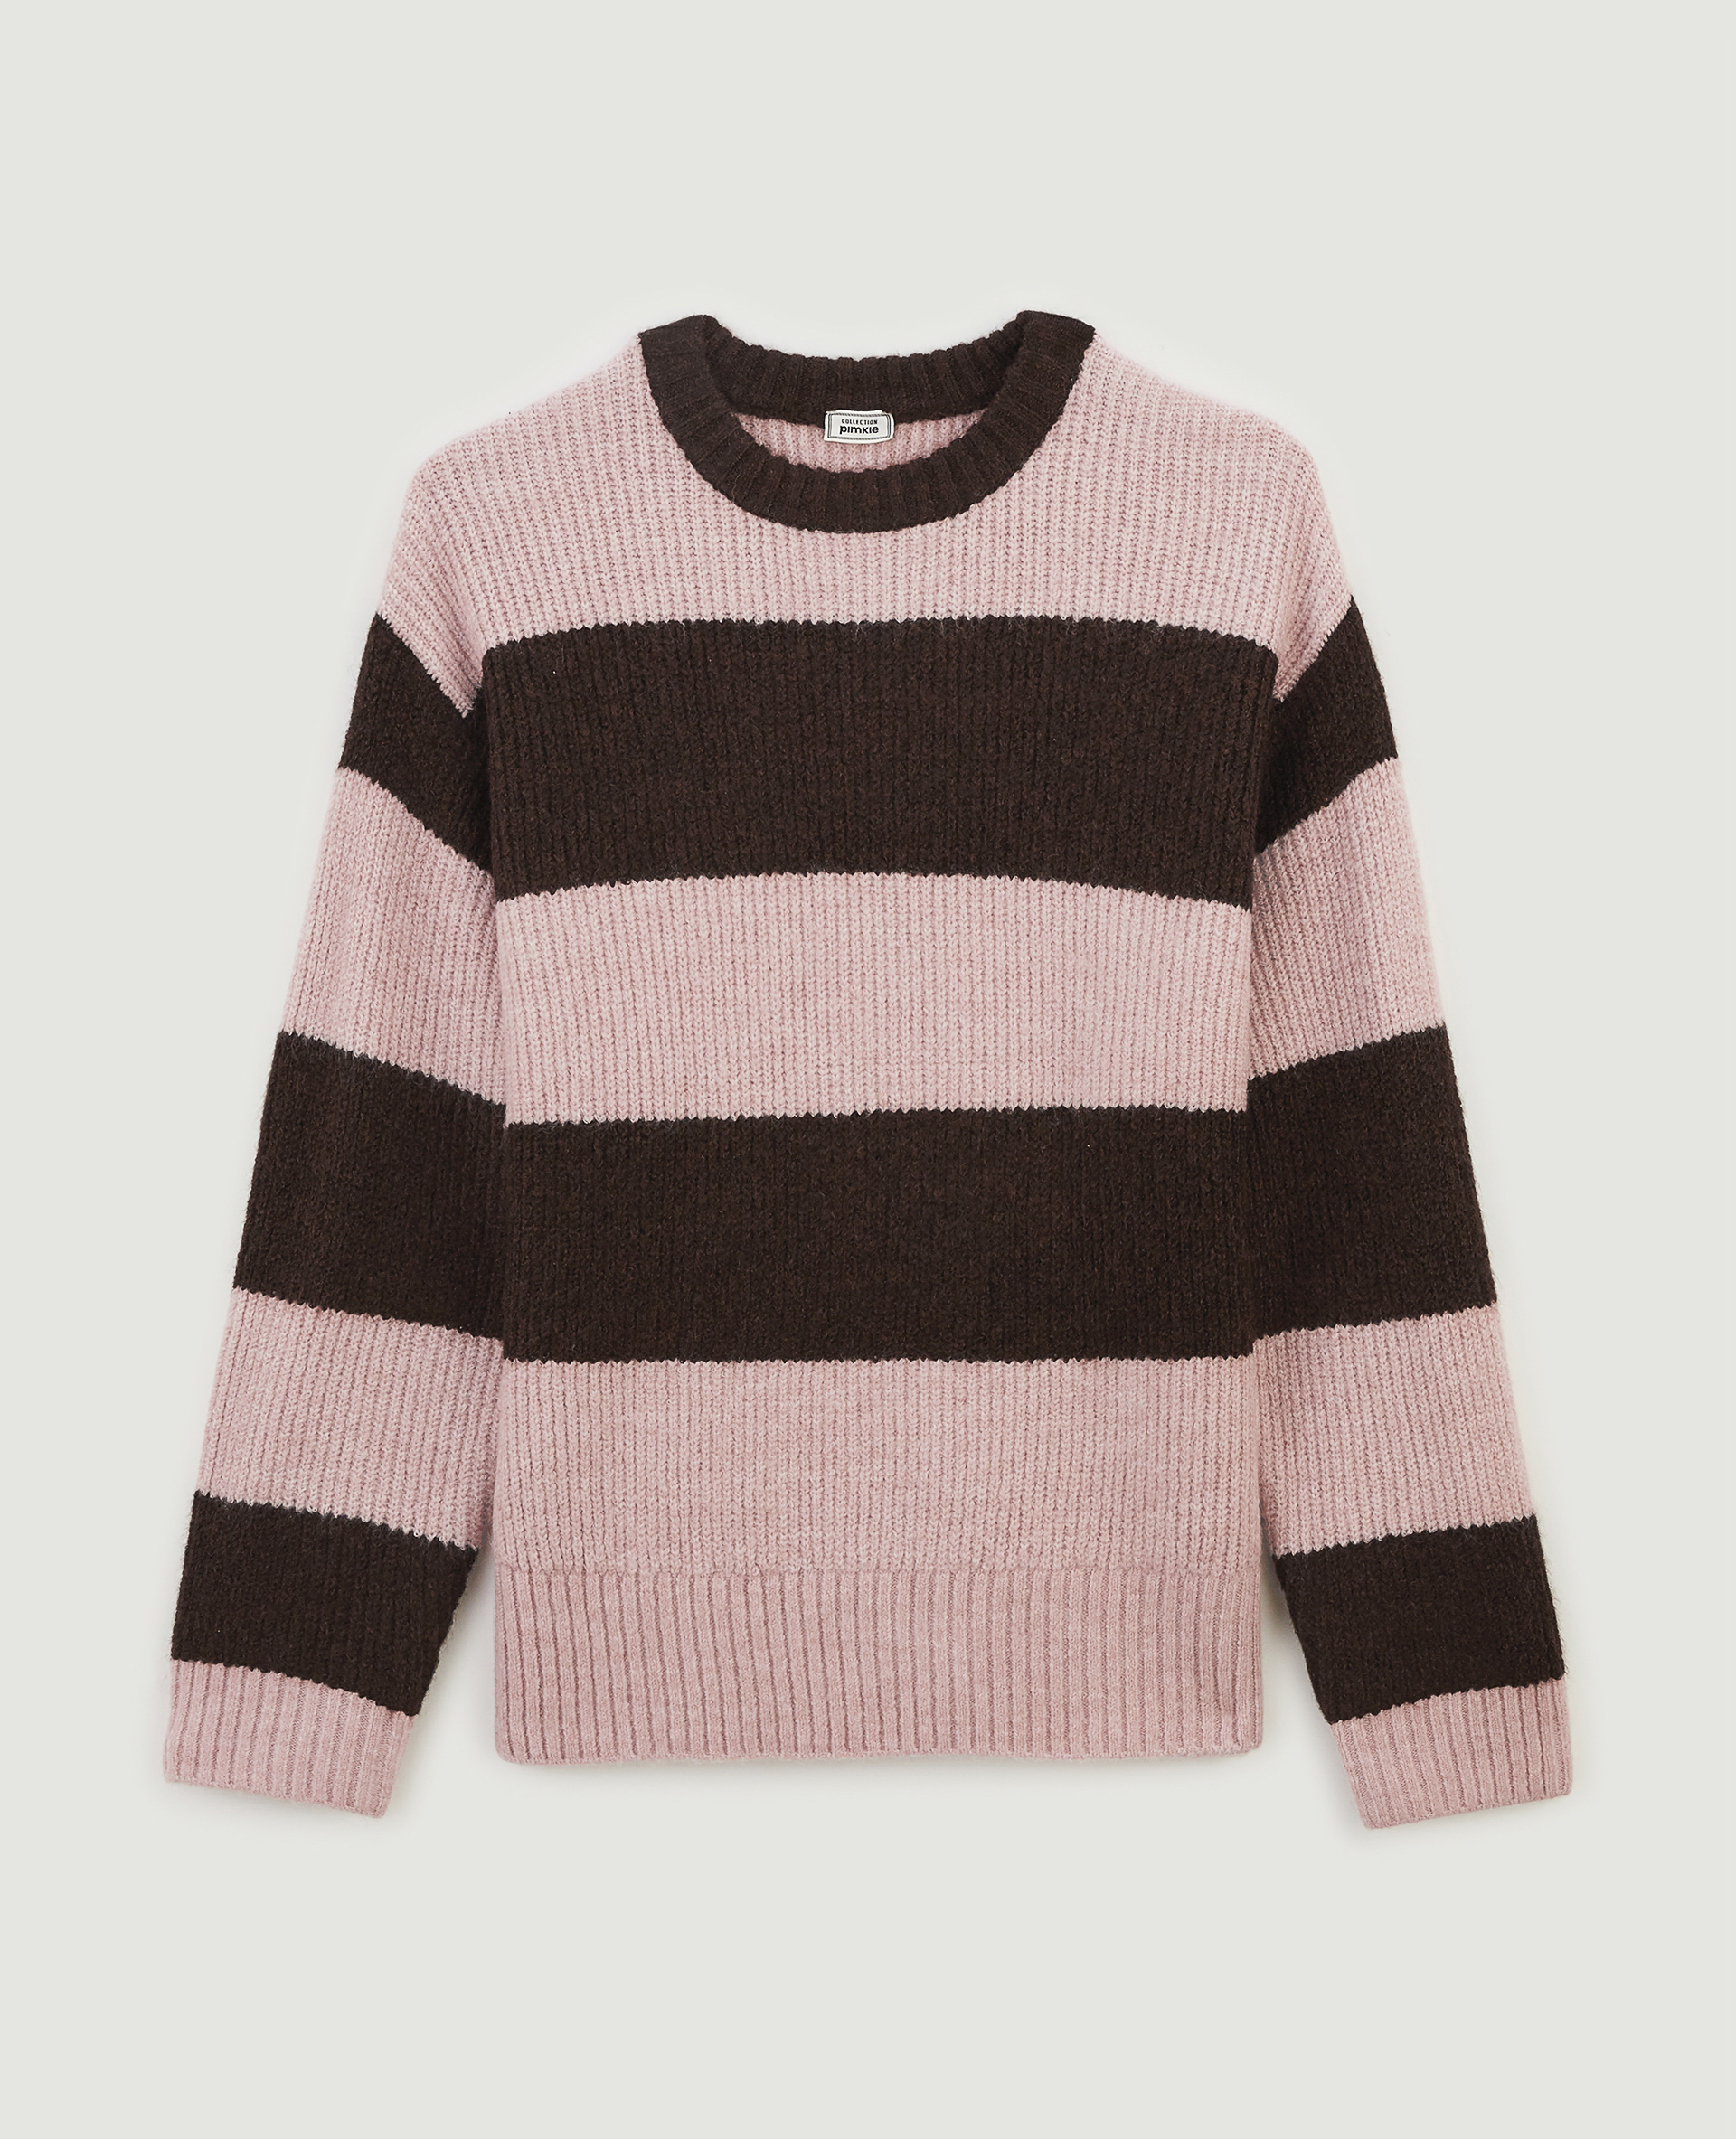 Pull col rond rose - Pimkie